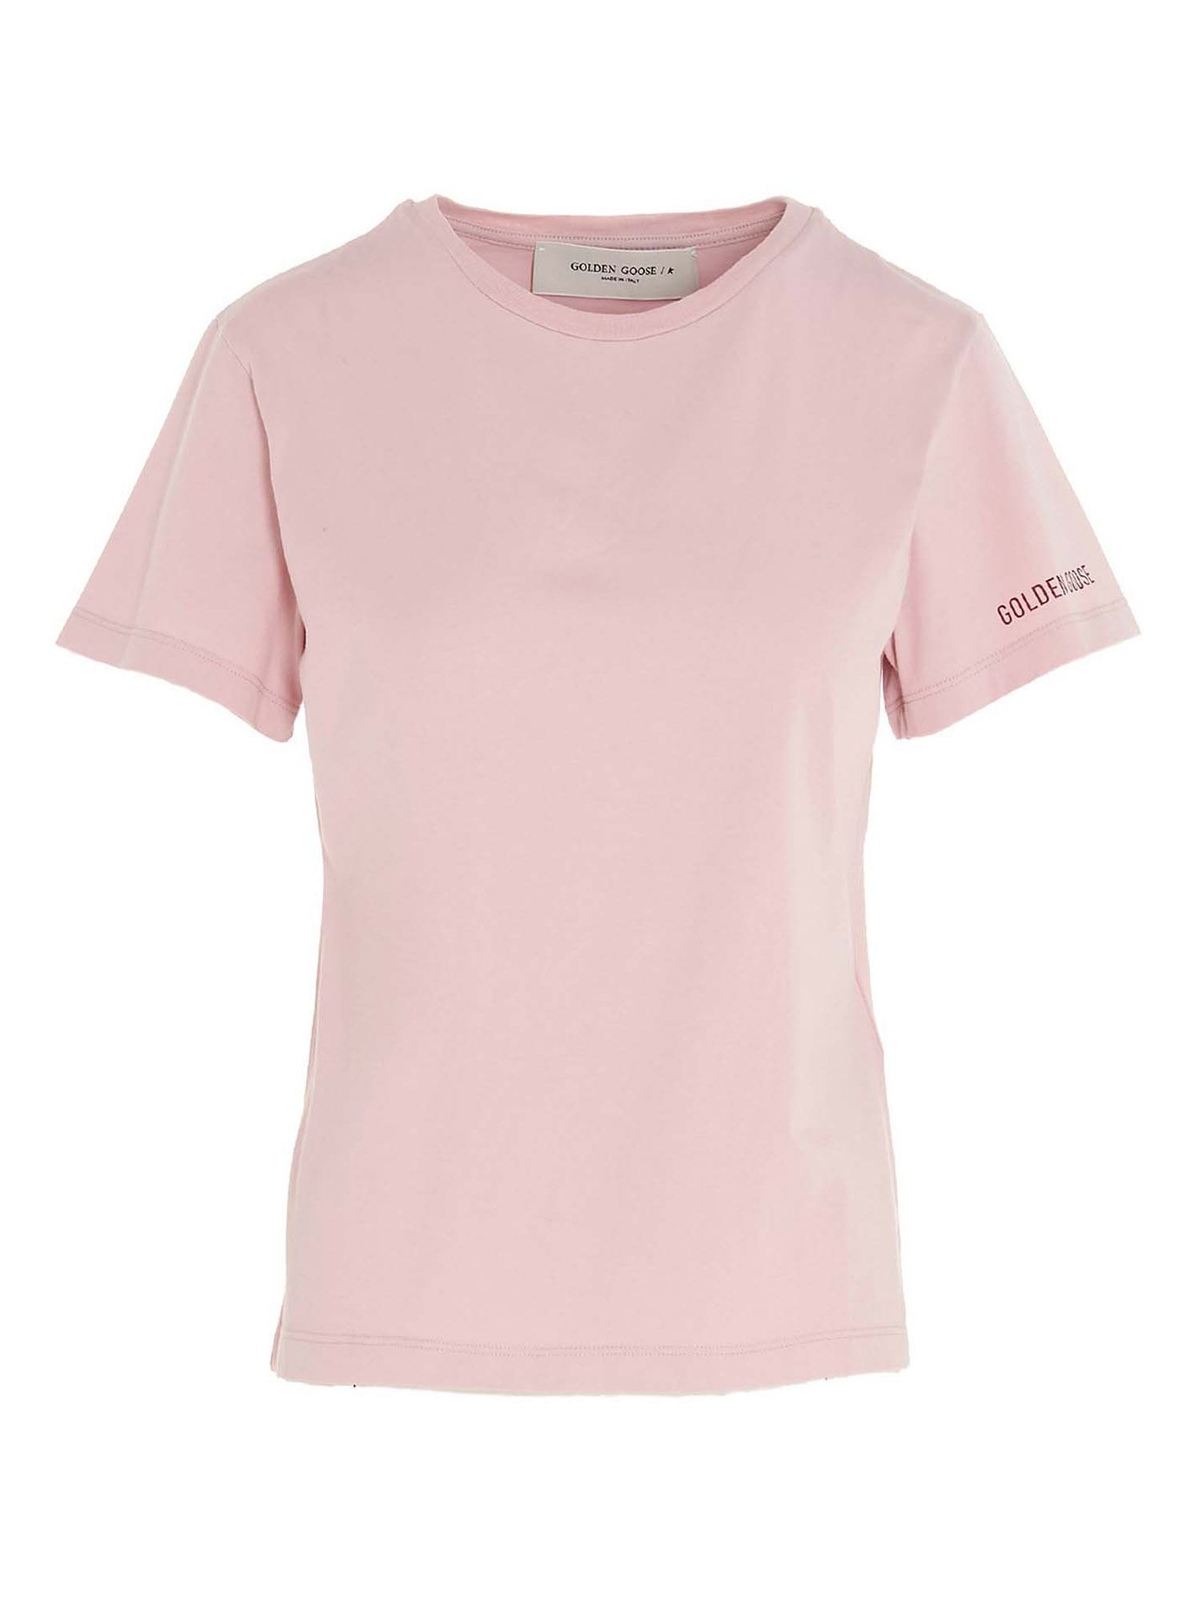 T-shirts Golden Goose - Ania T-shirt in pink - GWP00319P00018725528